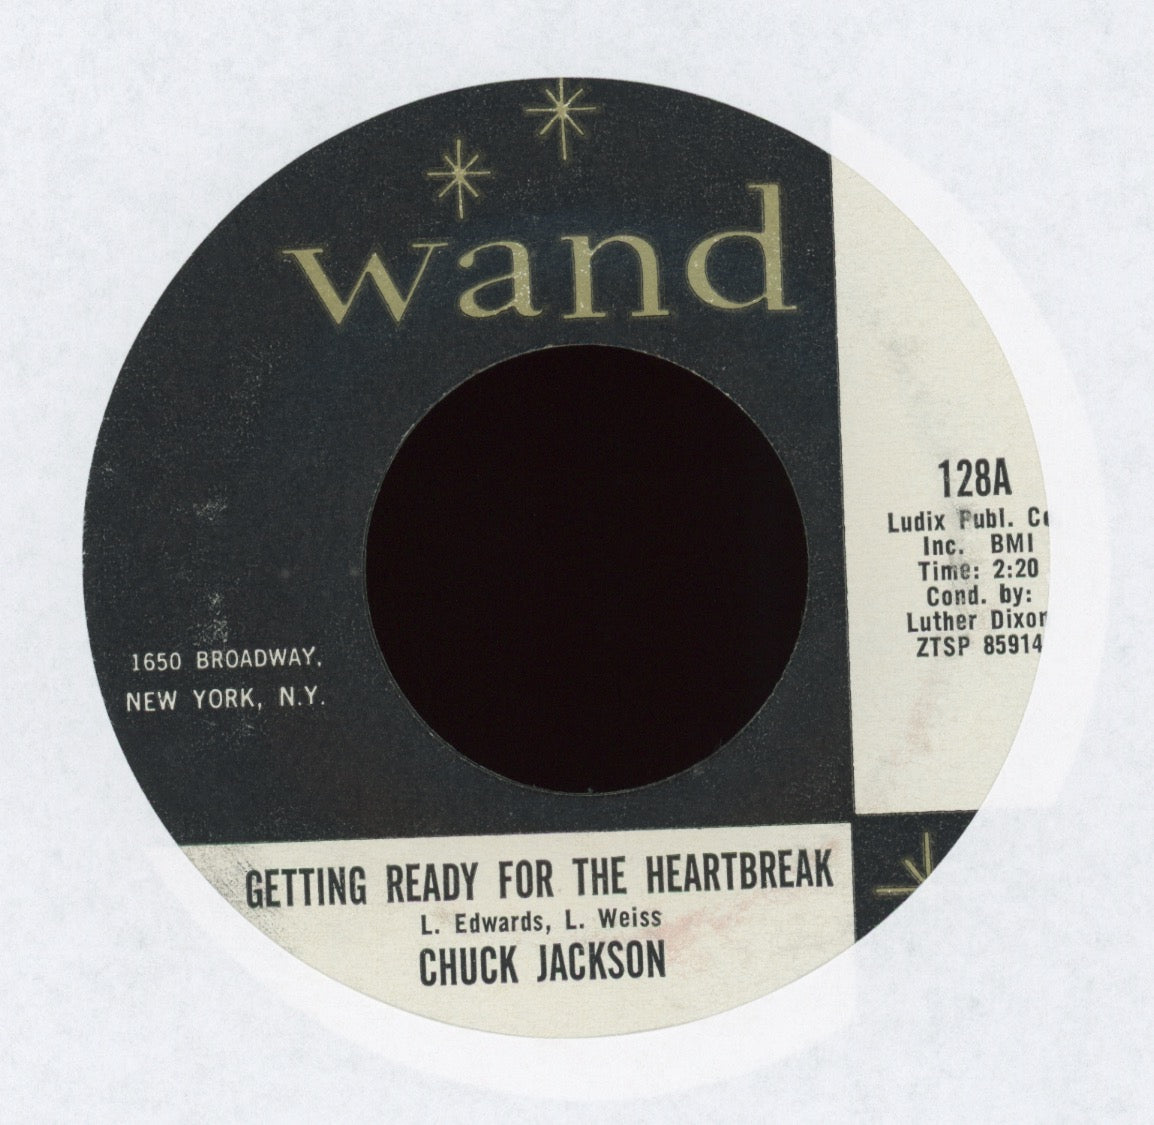 Chuck Jackson - Getting Ready For The Heartbreak on Wand